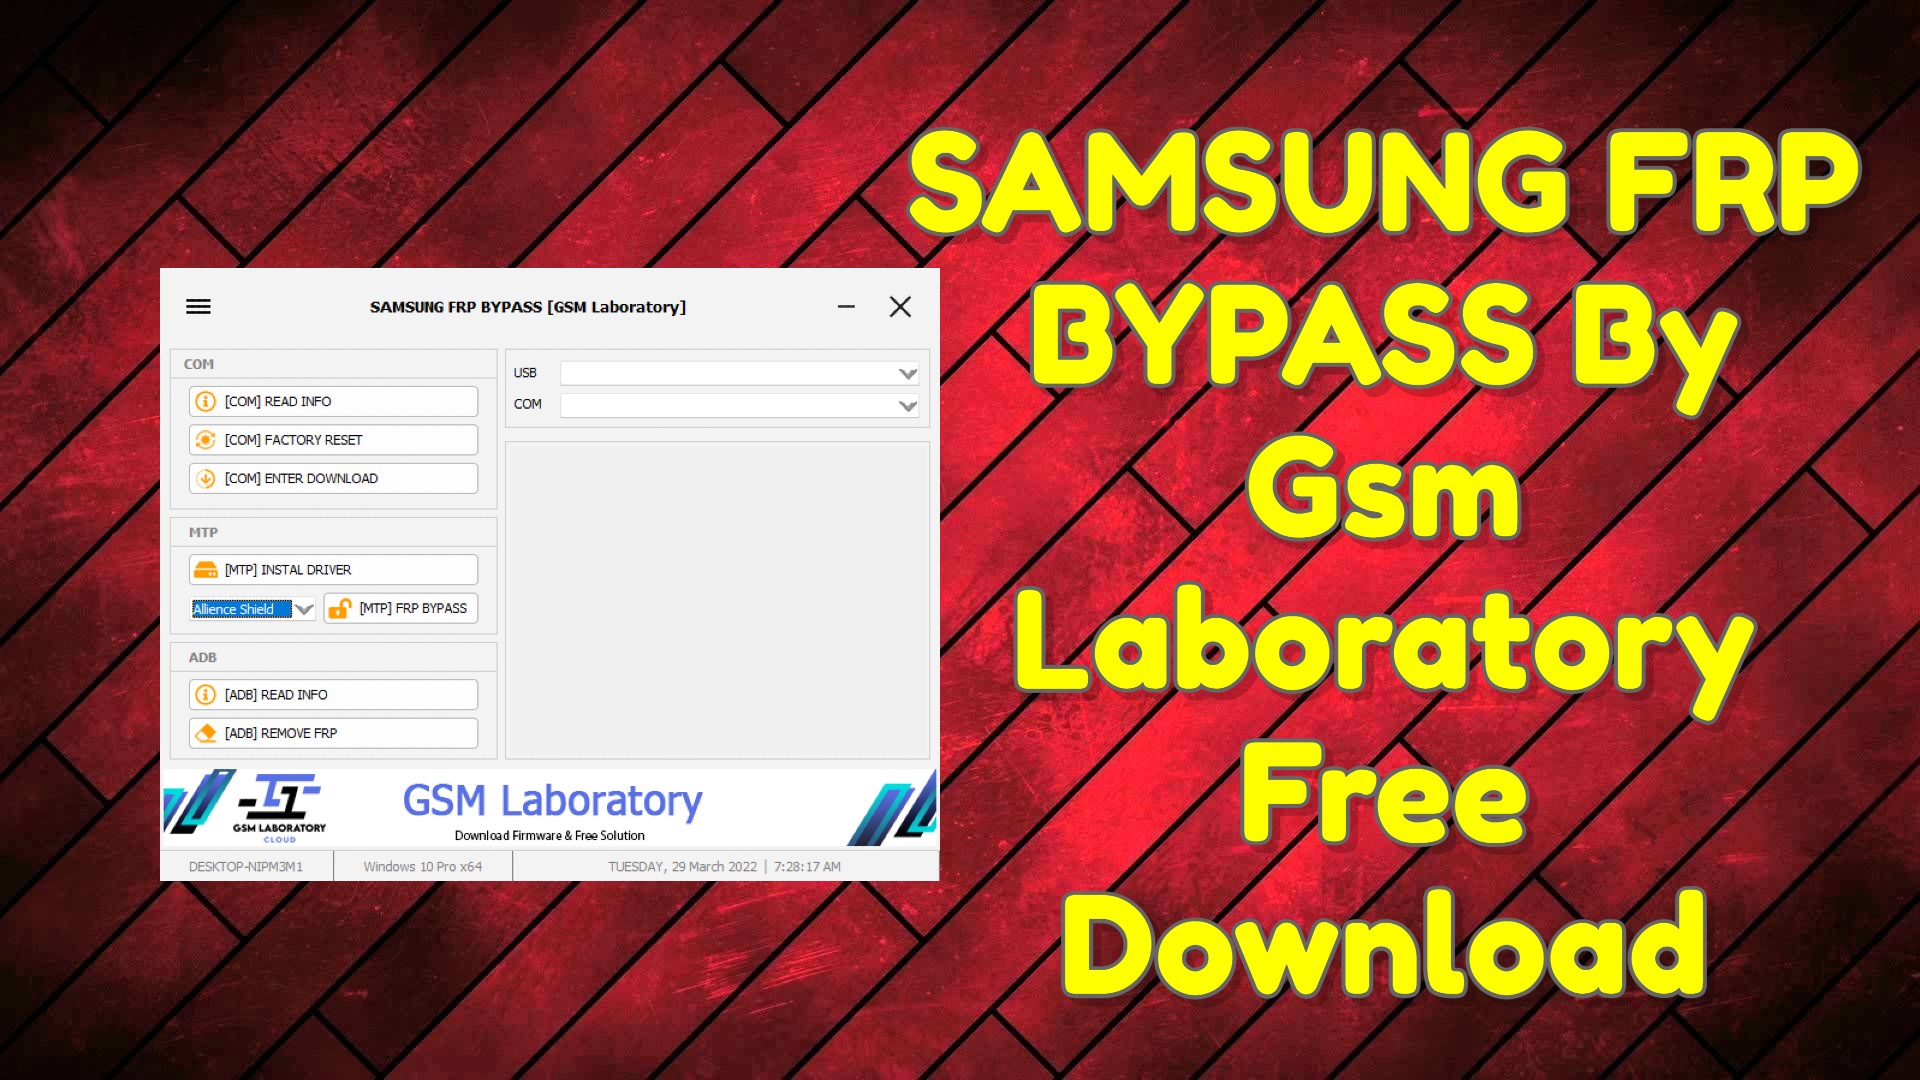 SAMSUNG FRP BYPASS By Gsm Laboratory Free Download